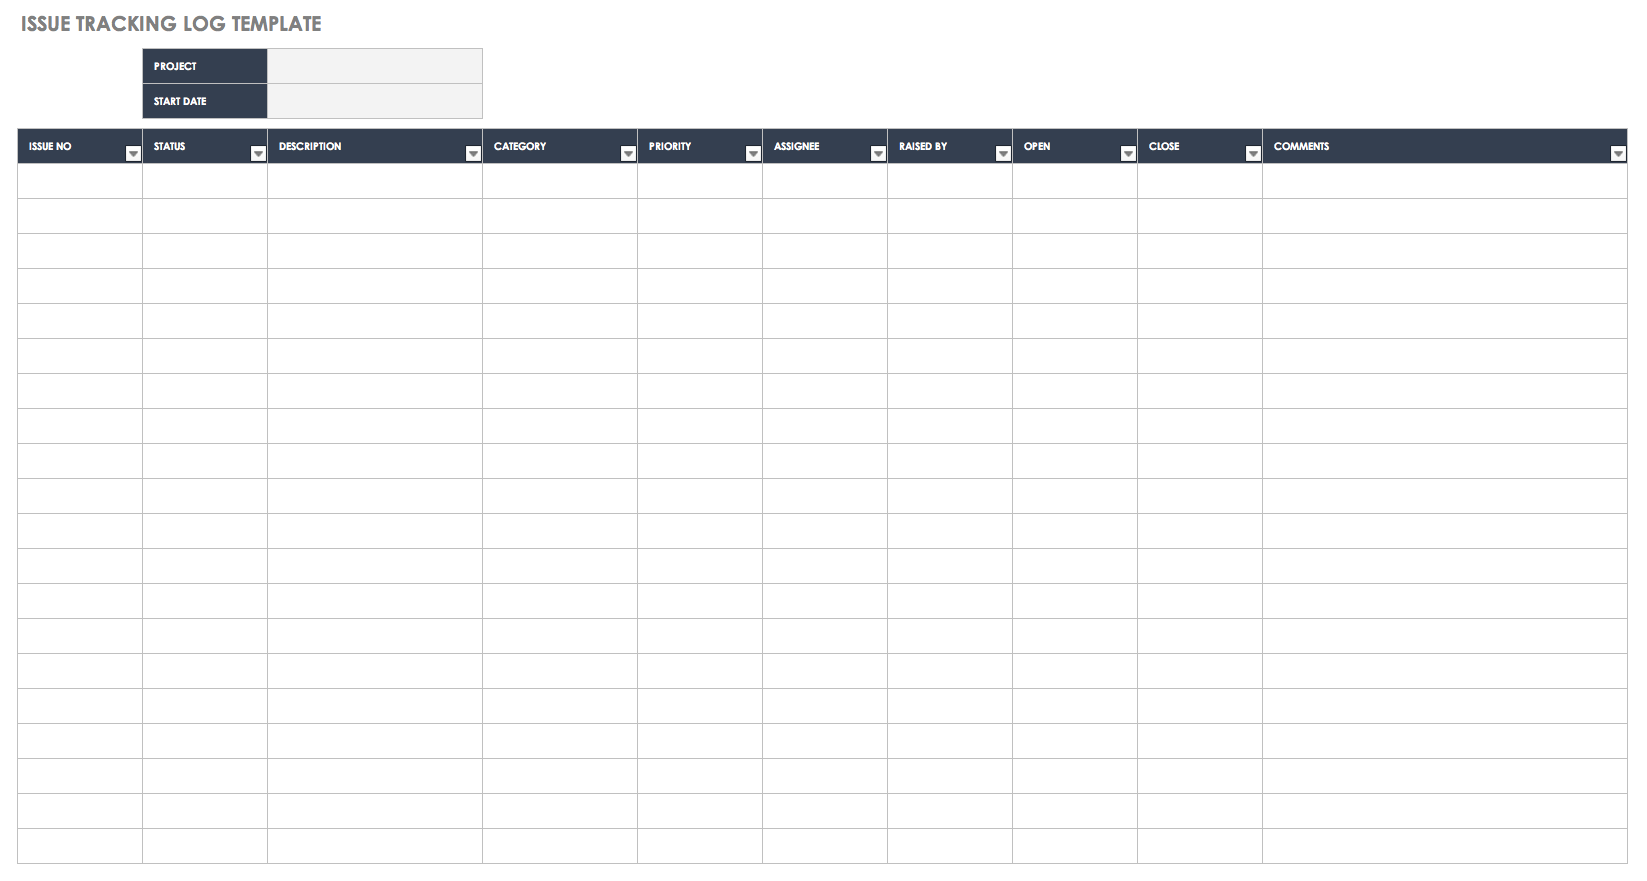 Issue Tracking Log Template